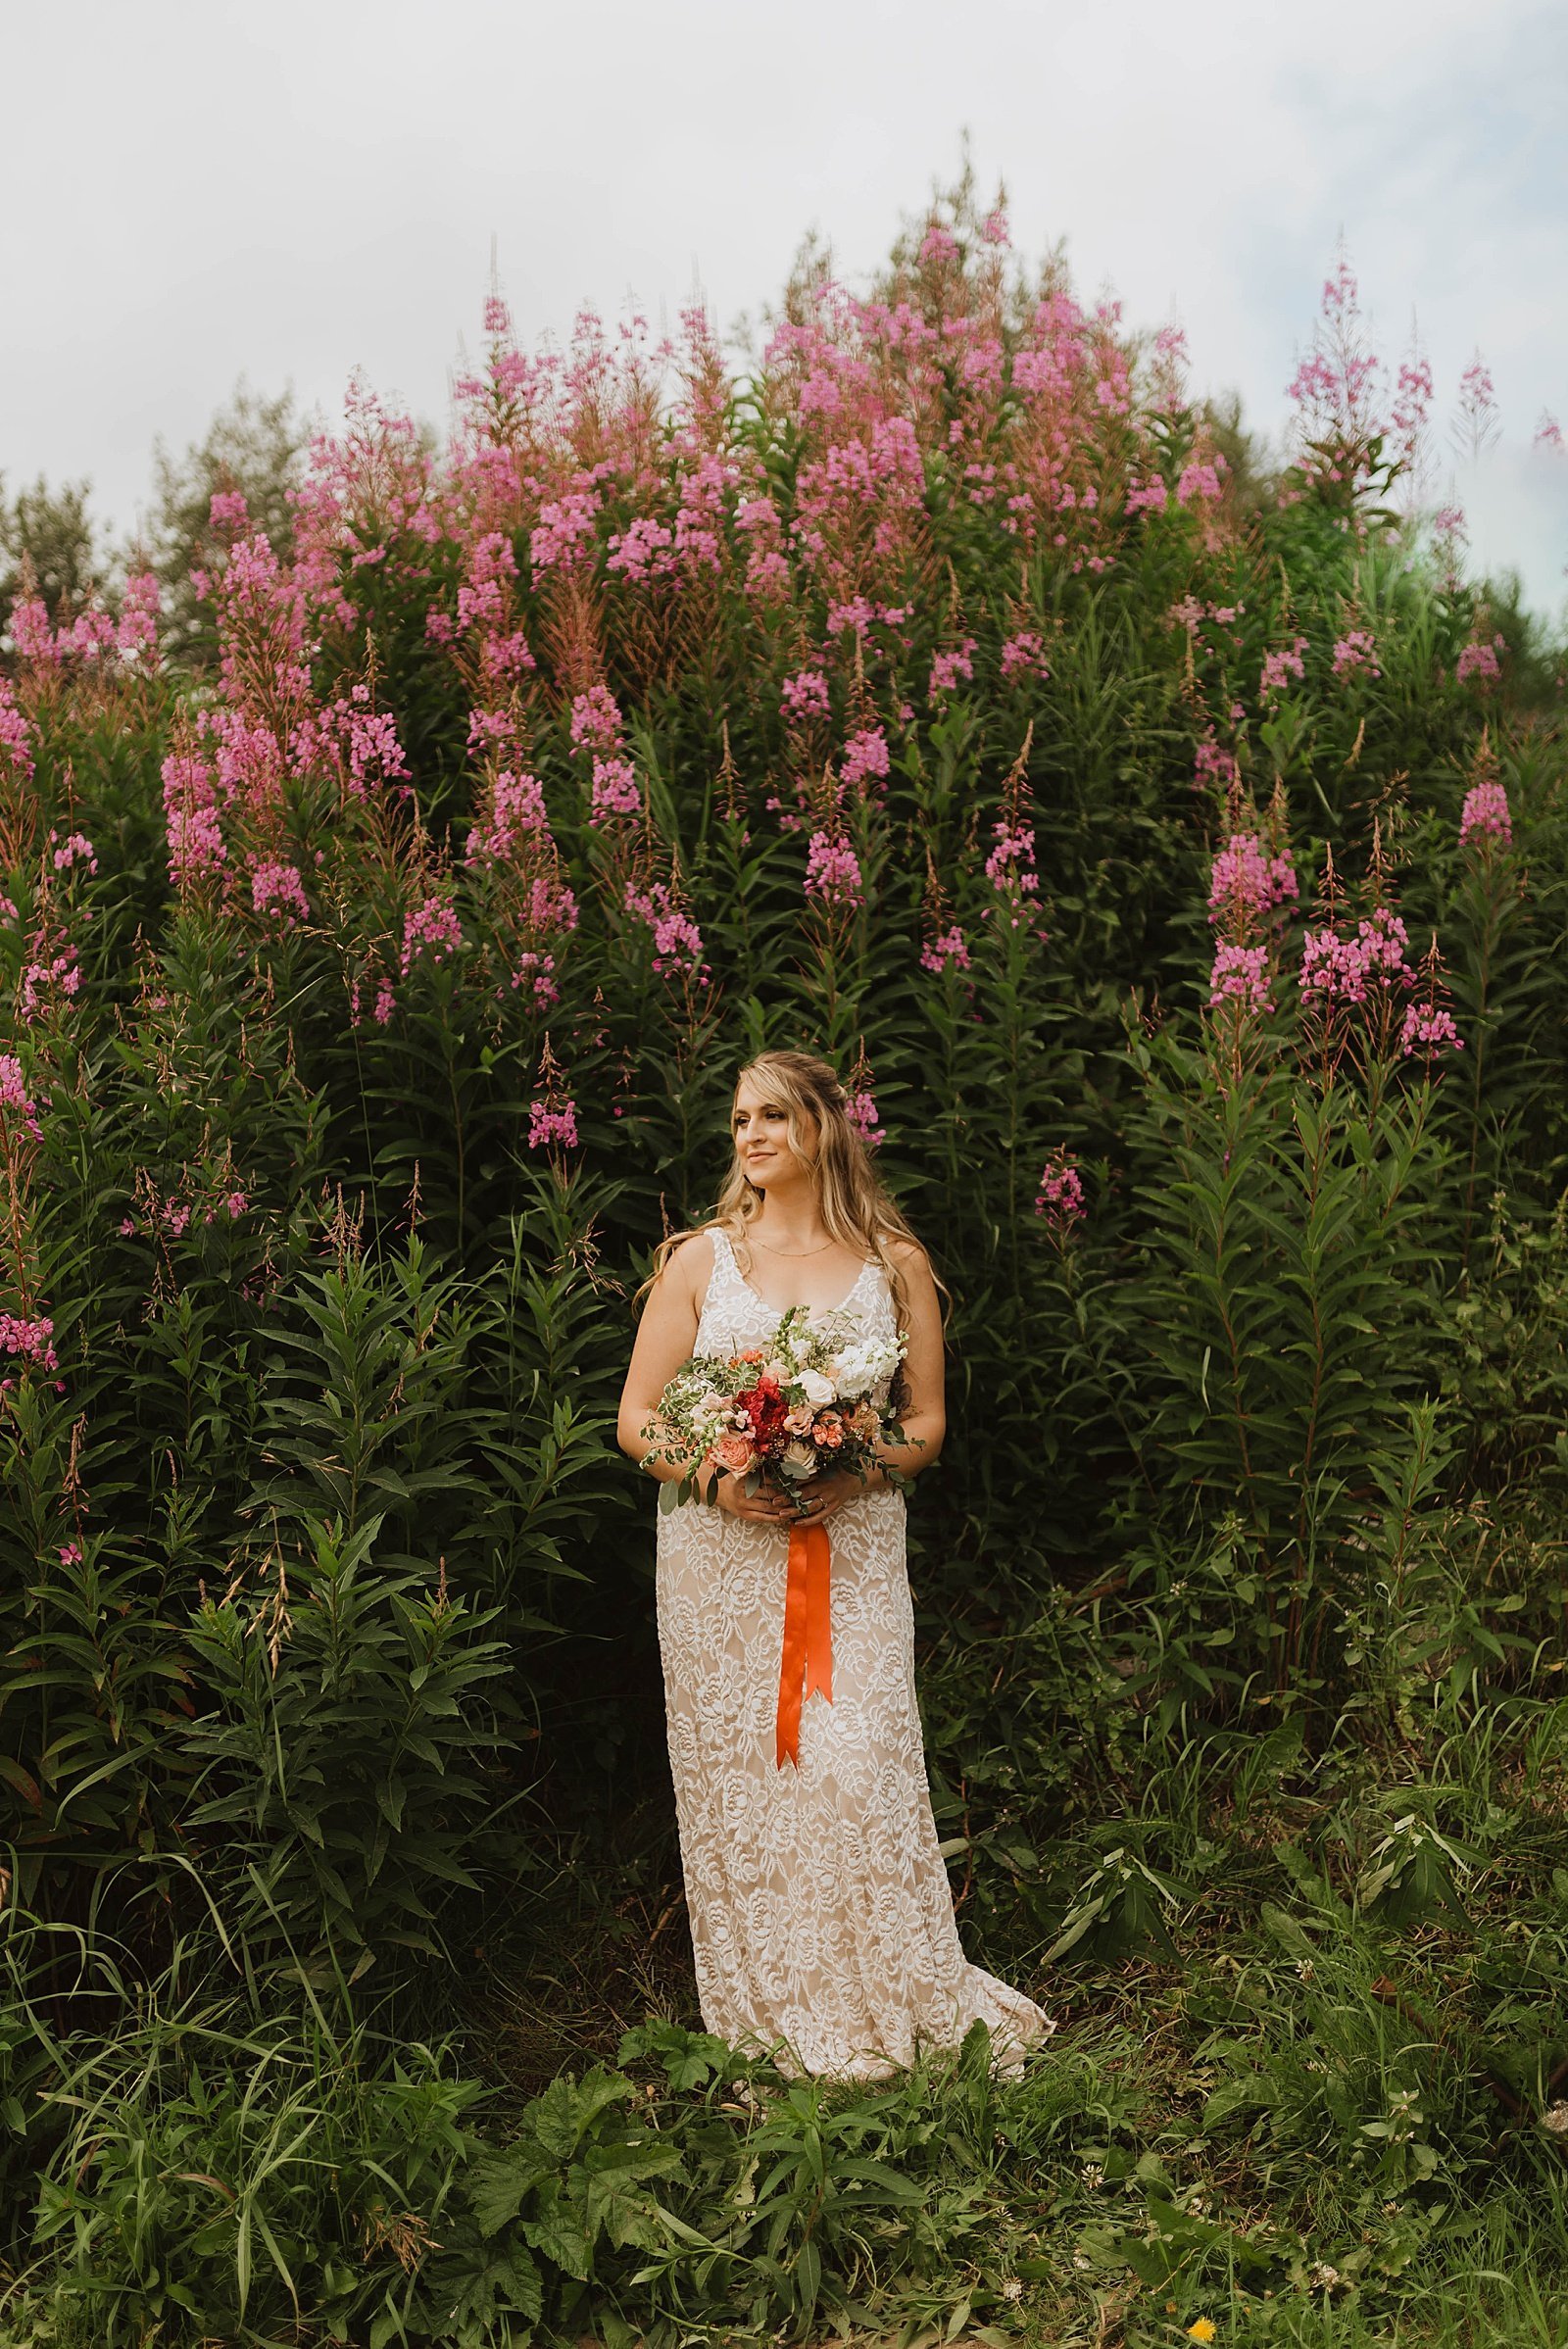  Boho bride in lace dress standing in front of tall red flowers for Alaska summer wedding.  